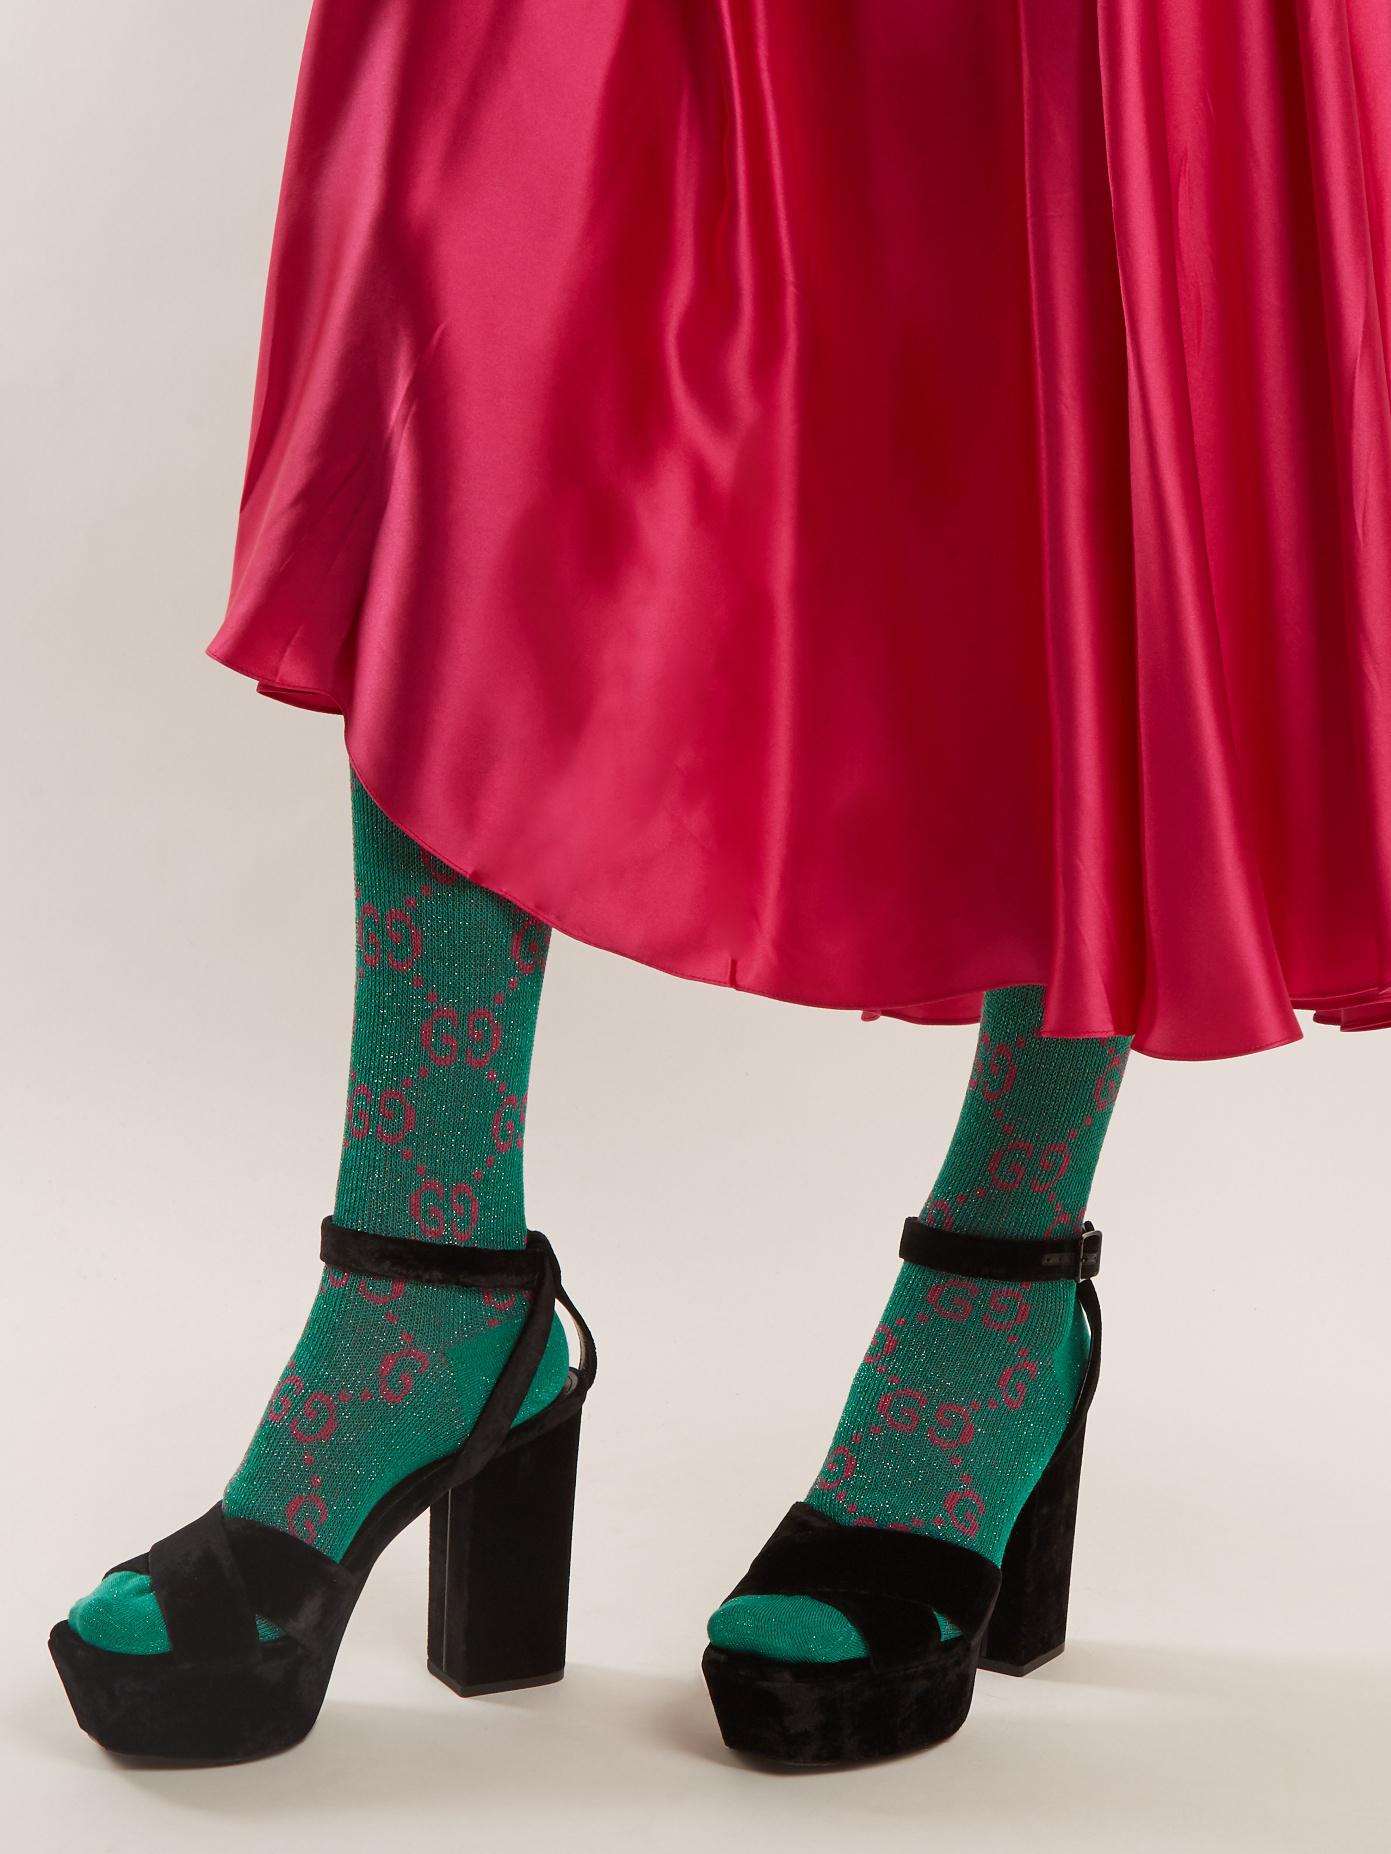 Gucci Cotton Lamé GG Socks in Emerald/Pink (Green) - Save 18% - Lyst